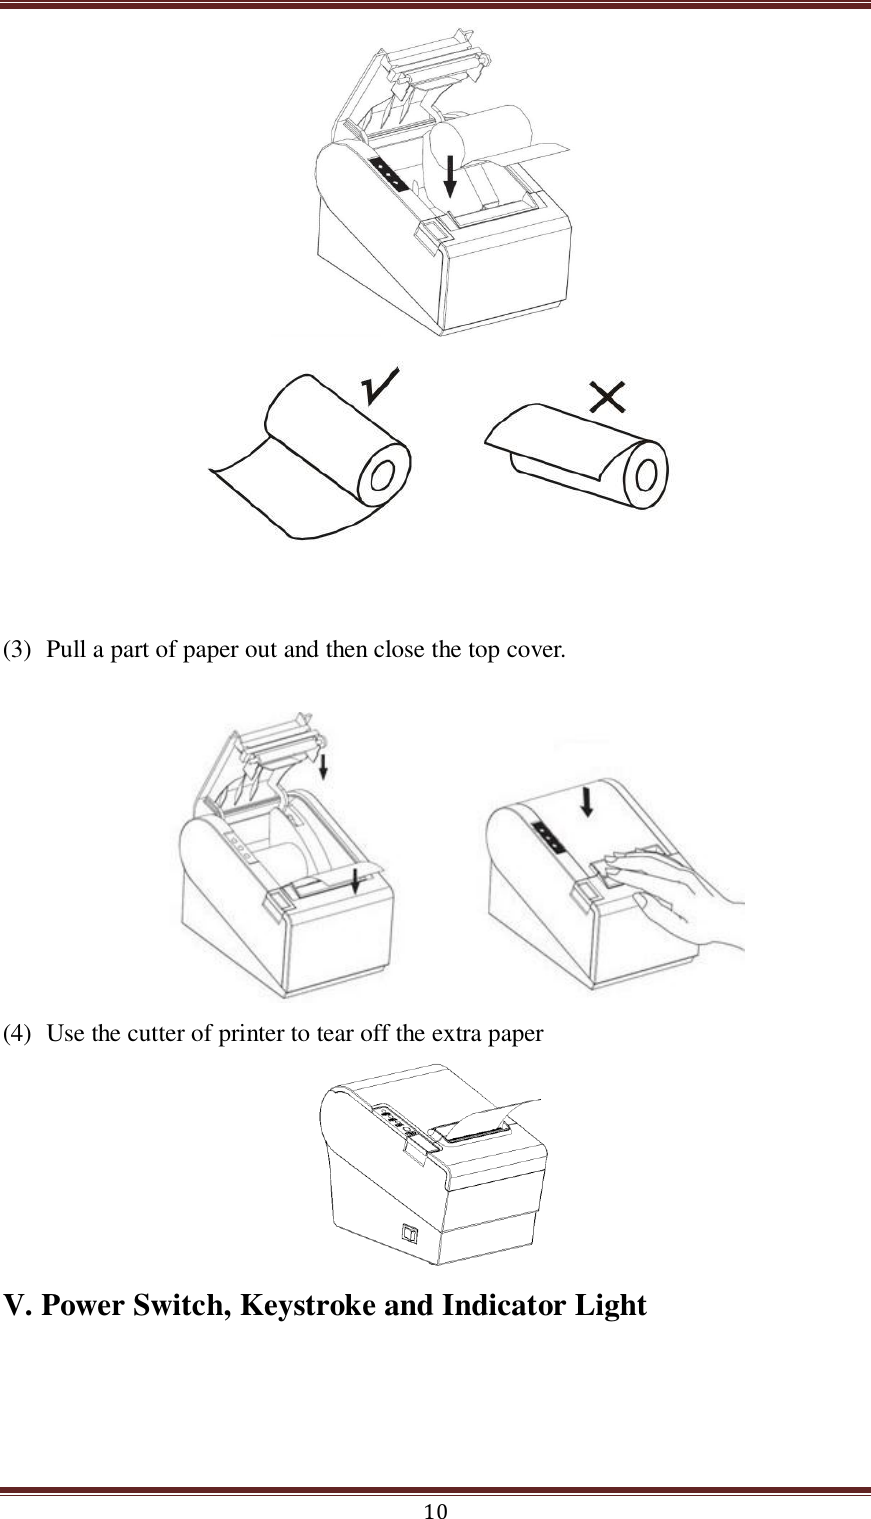  10        (3) Pull a part of paper out and then close the top cover.   (4) Use the cutter of printer to tear off the extra paper  V. Power Switch, Keystroke and Indicator Light   